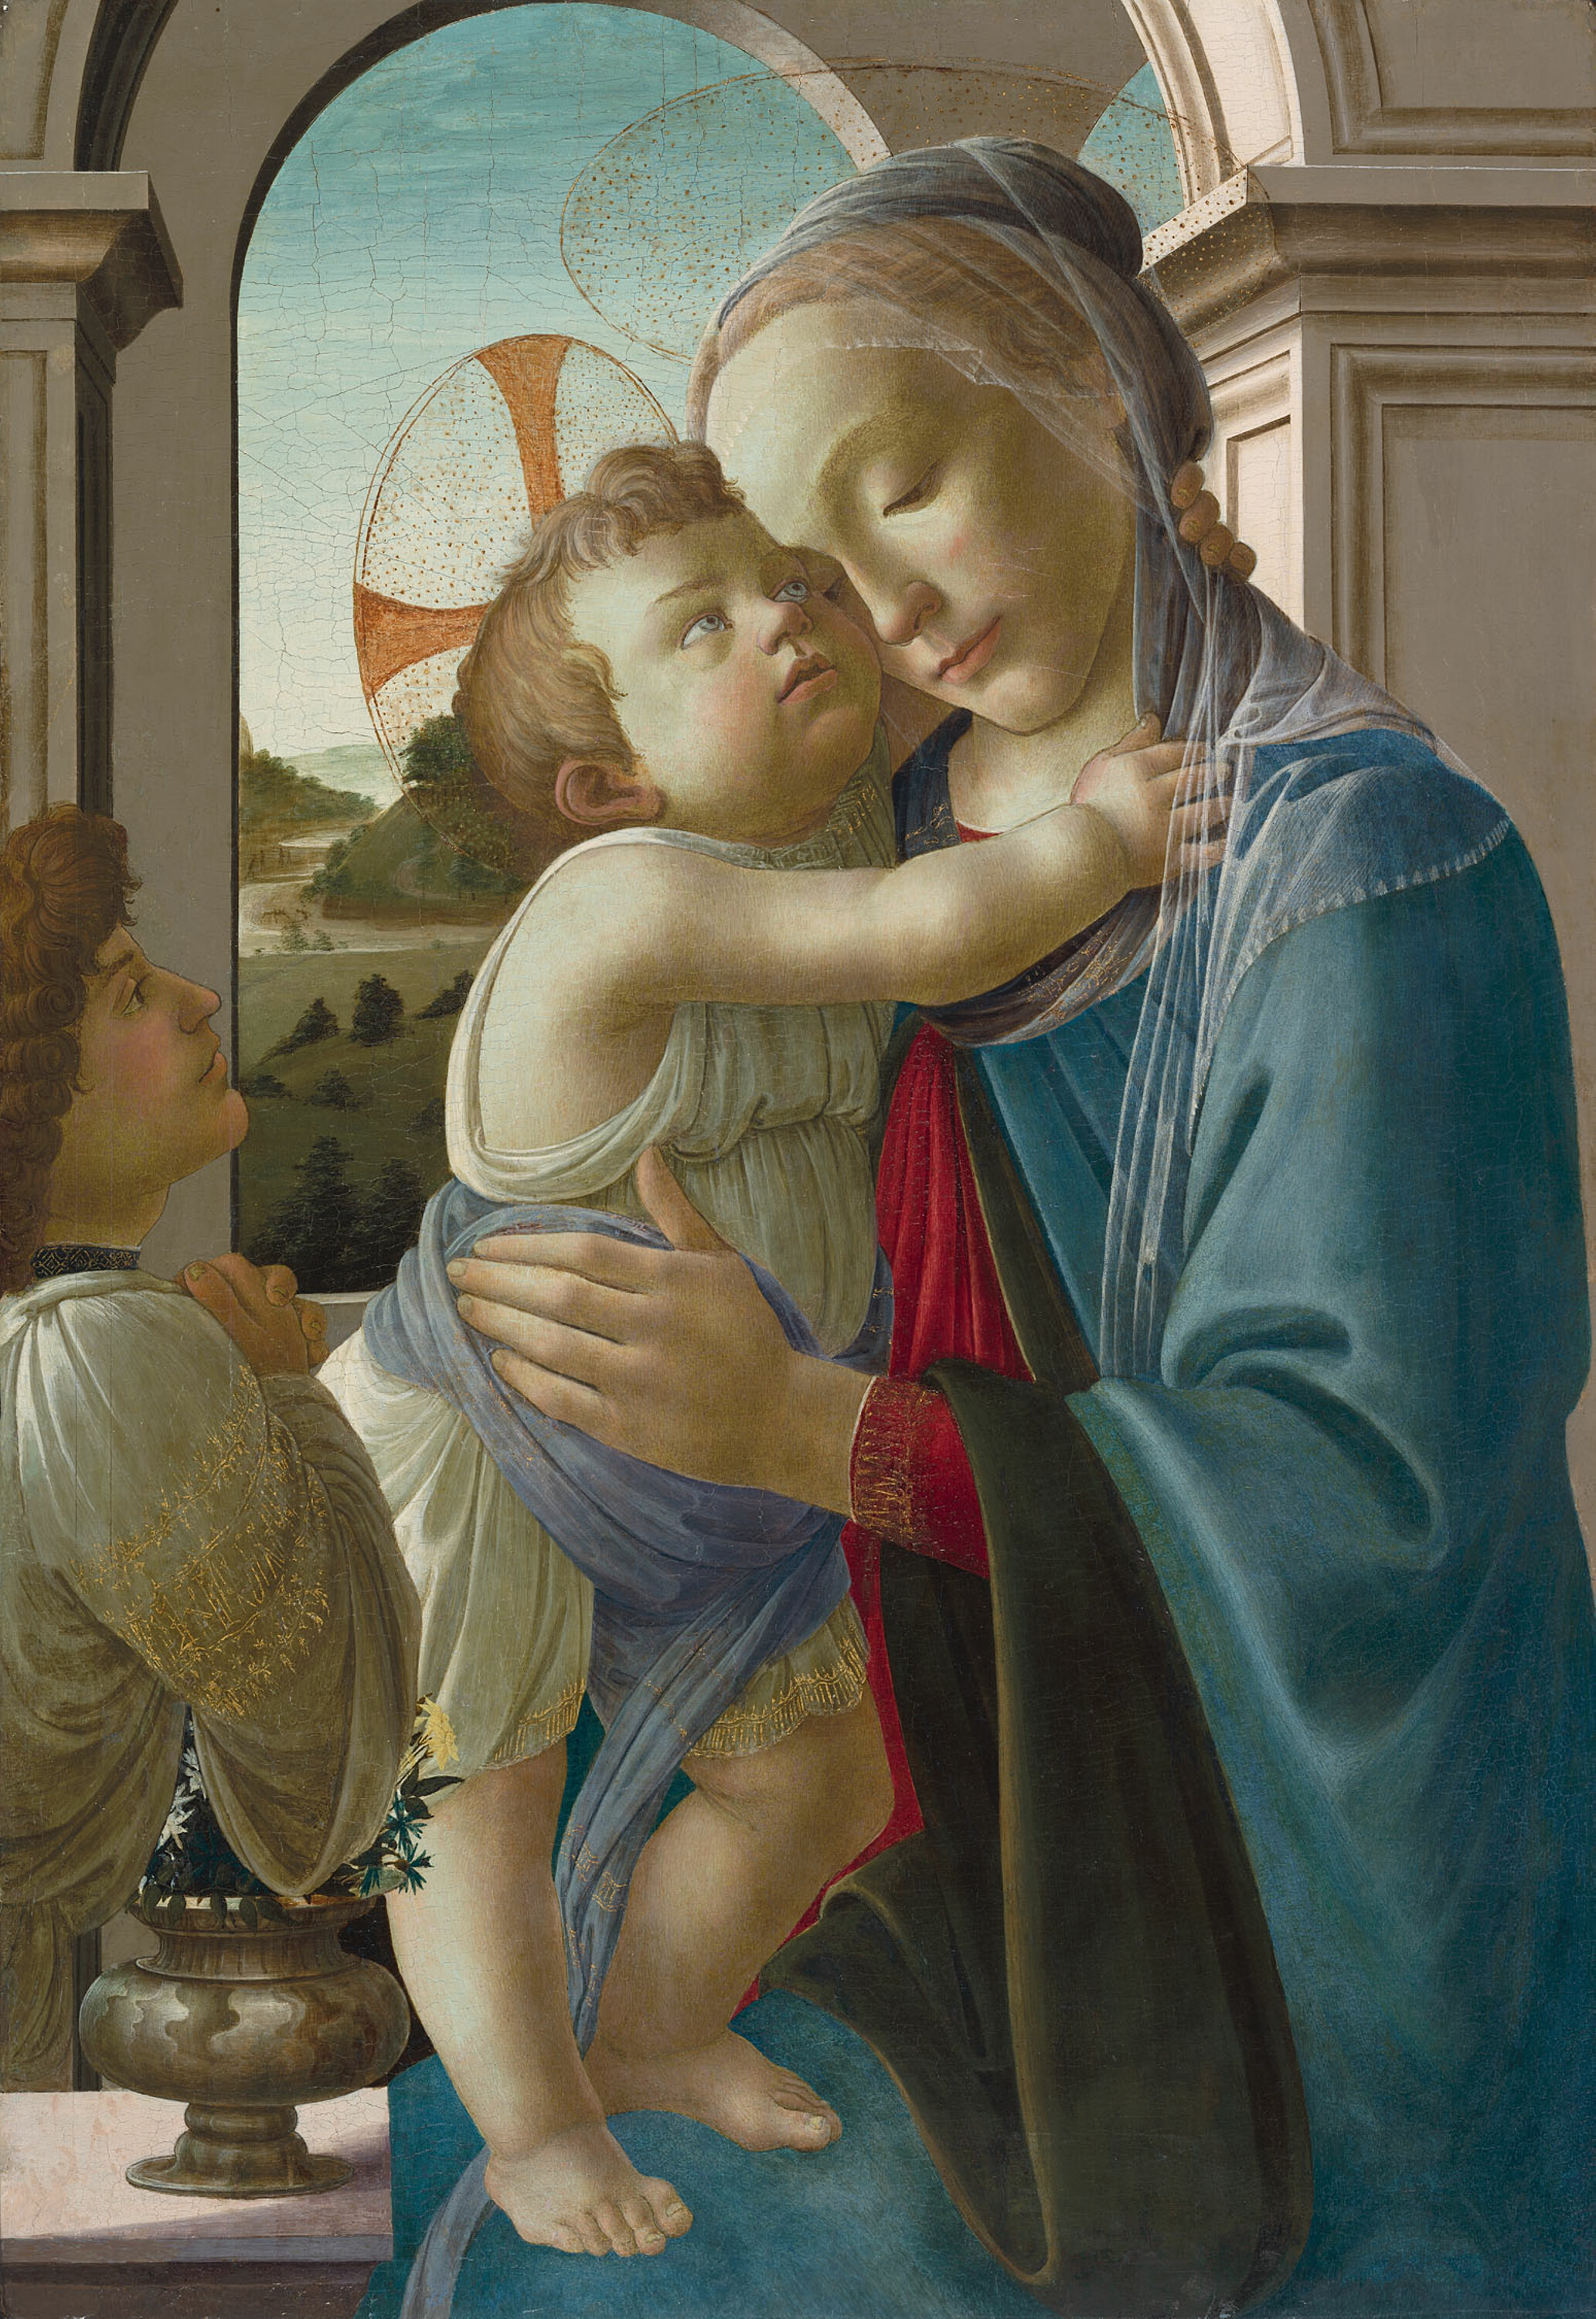 Virgin and Child with an Angel by Sandro Botticelli - 1475/85 - 85.8 × 59.1 cm Art Institute of Chicago